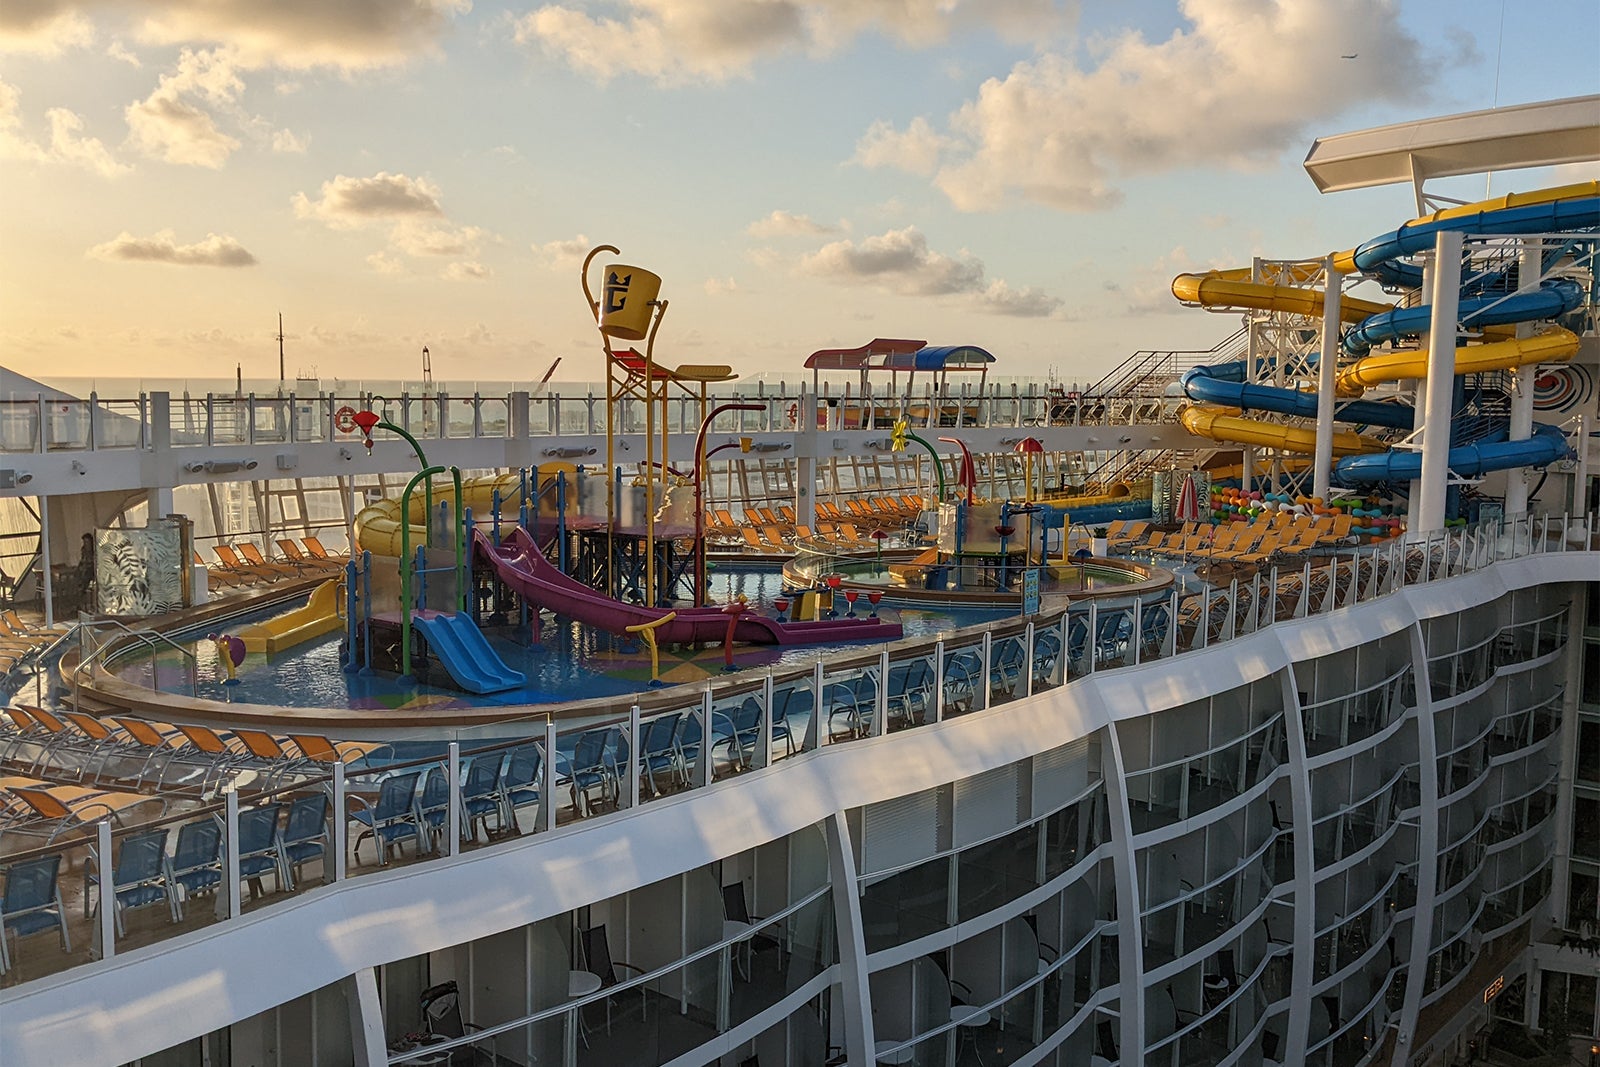 Cruise ship top deck with colorful water slides